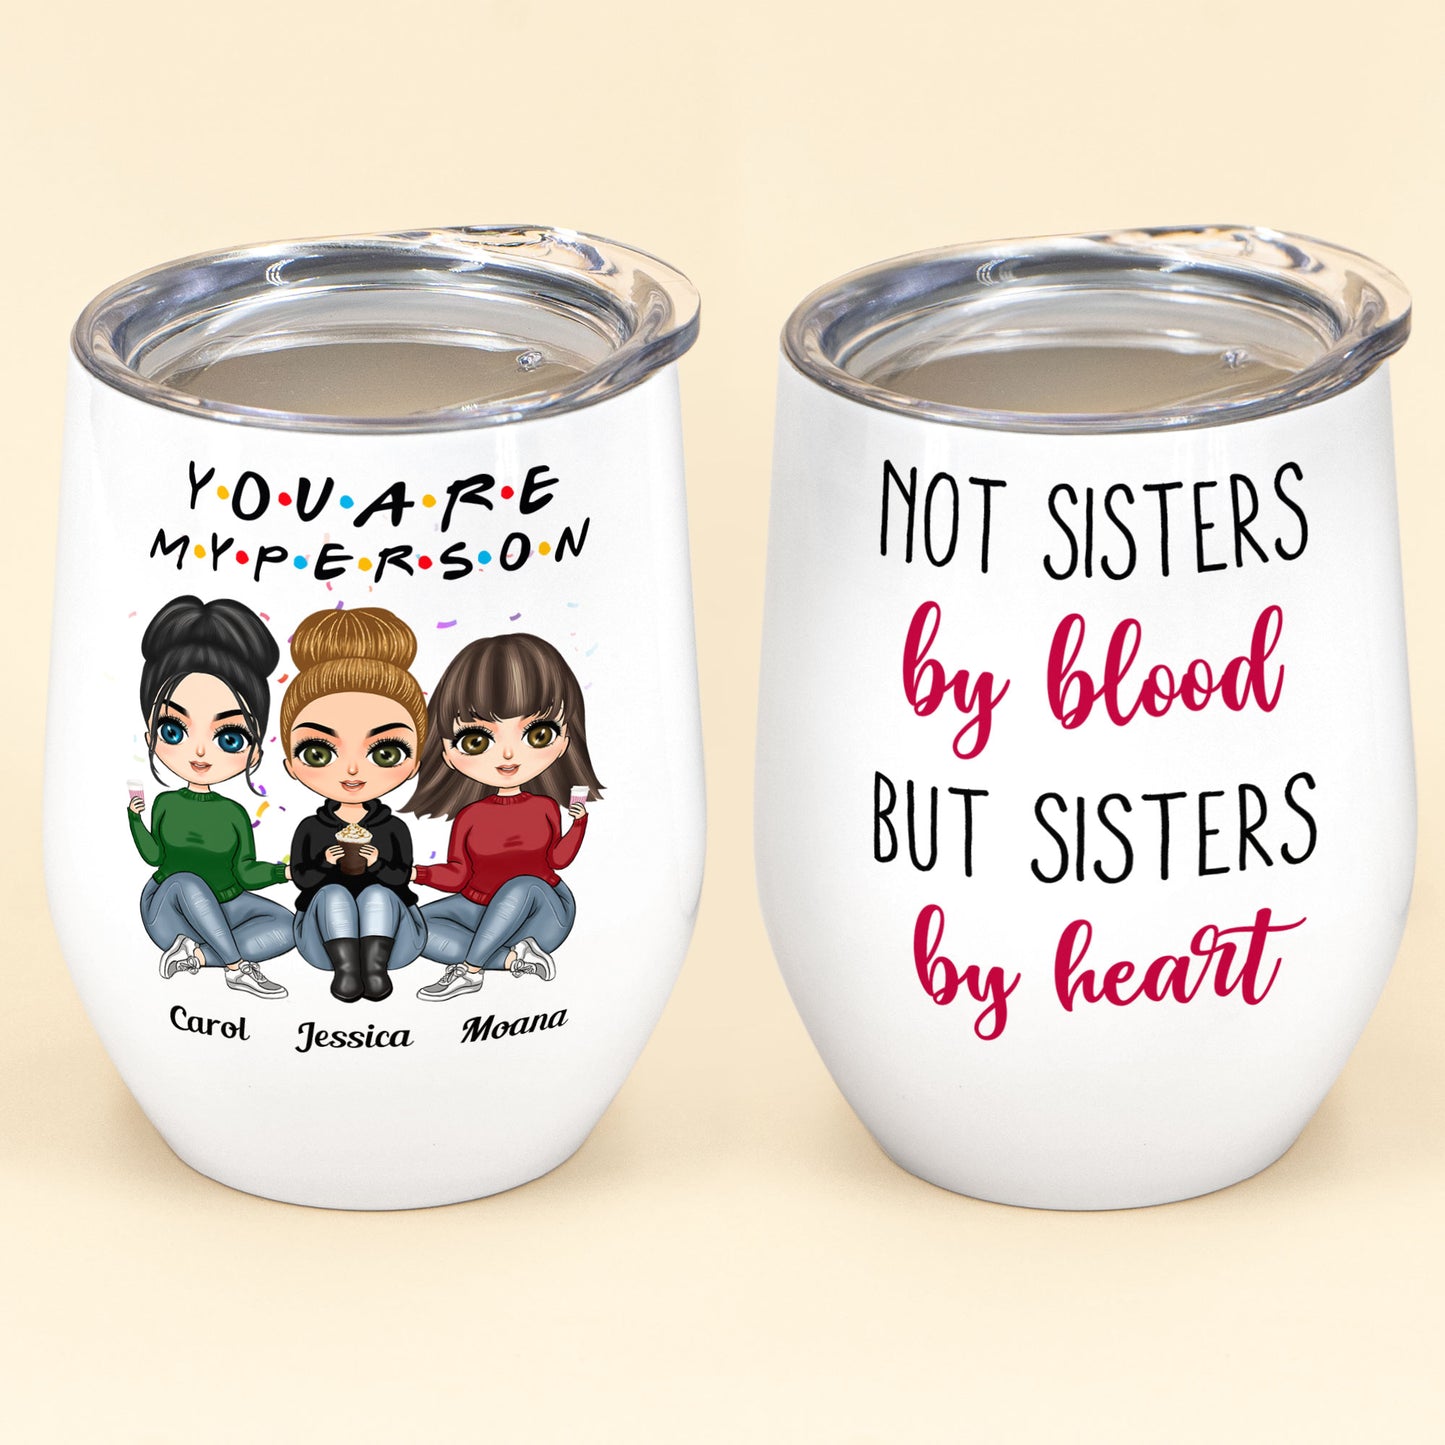 You're My Person - Personalized Wine Tumbler - Birthday, Christmas Gift For BFF, Best Friends, Besties, Soul Sisters - Sitting Cartoon Girls